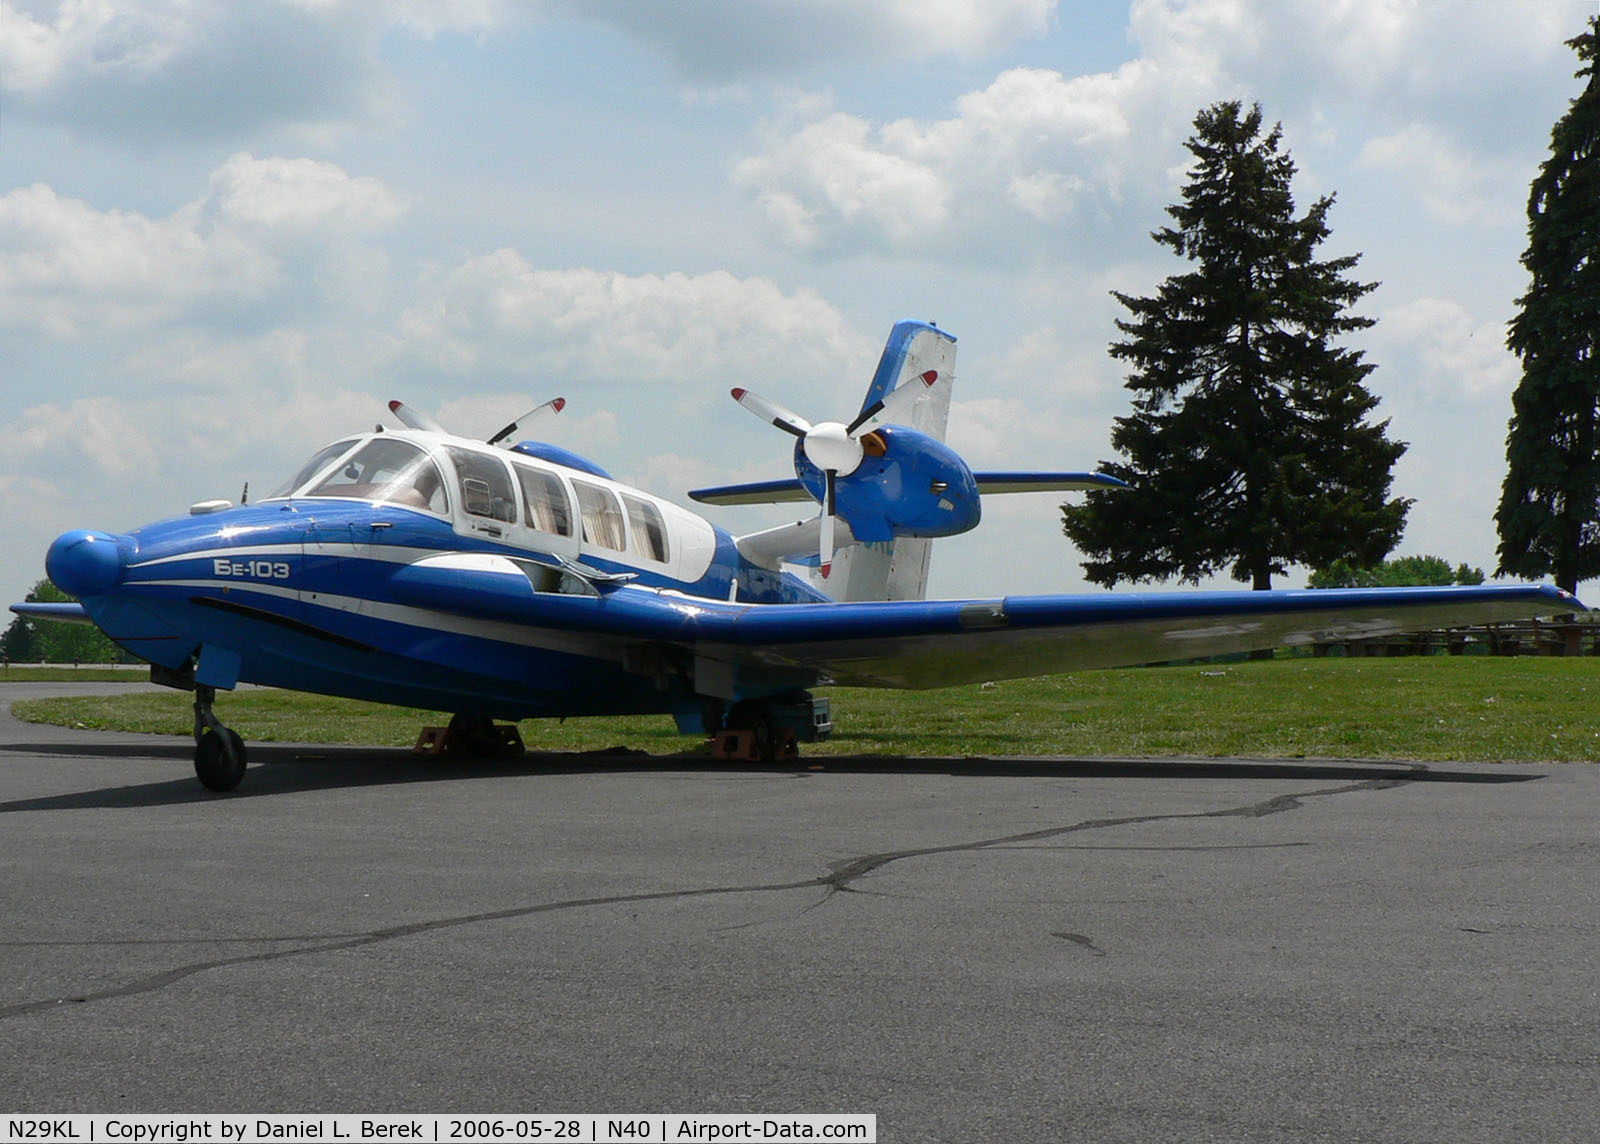 N29KL, 2003 Beriev Be-103 C/N 3302, Currently, there are only three of these beautiful and unusual Beriev Be-103 in the US; all three call Sky Manor Airport, Pittstown, NJ, their home.